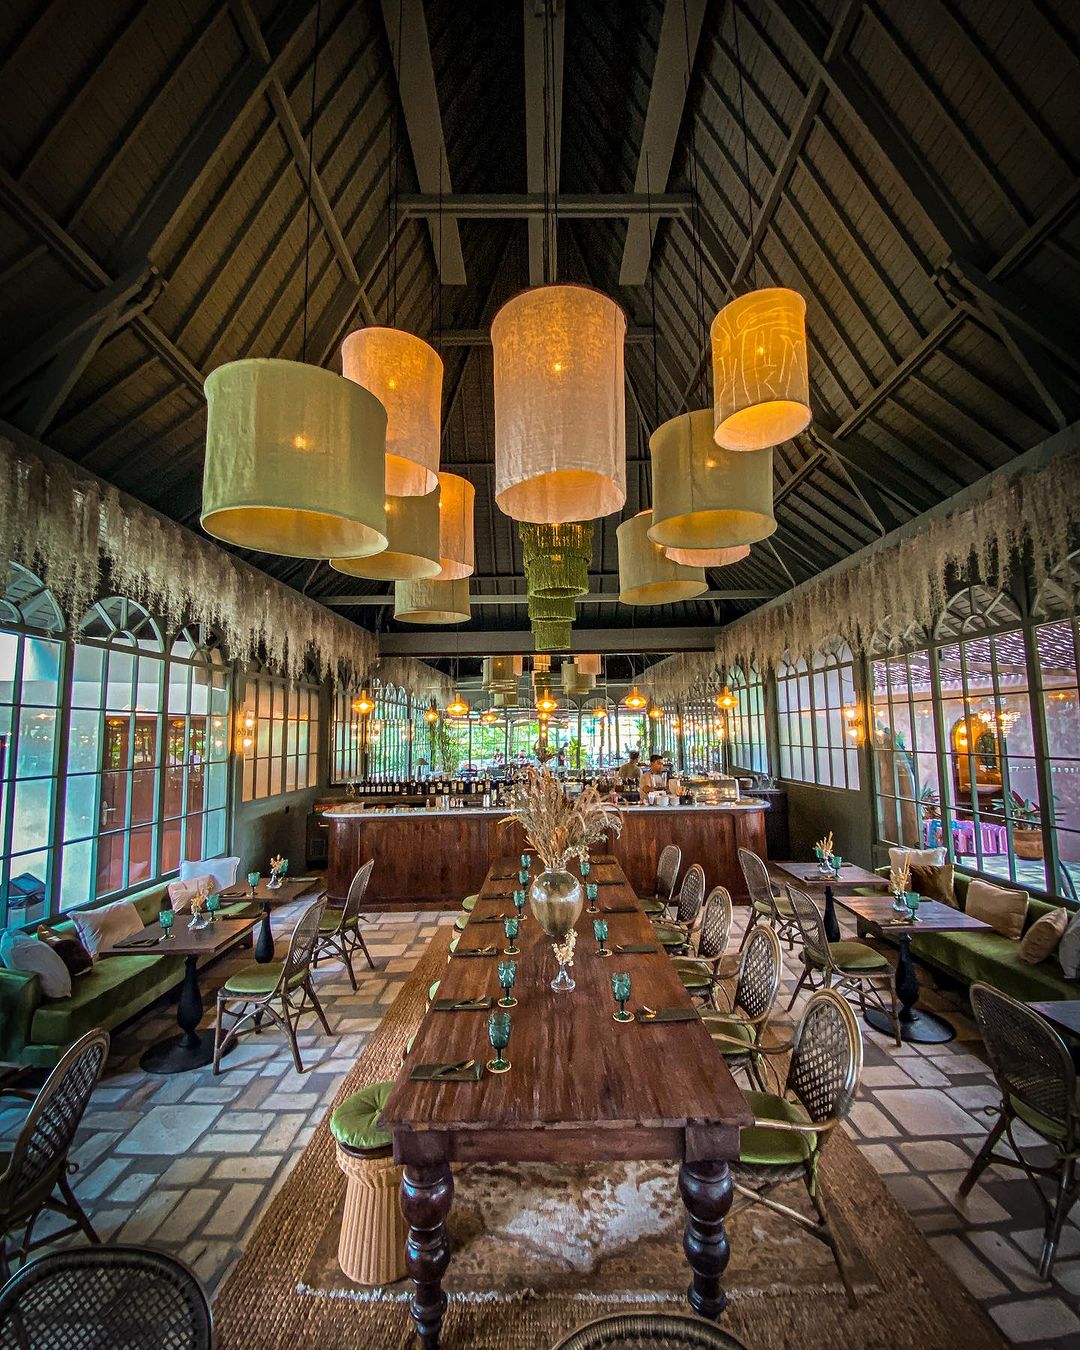 Review Plant Bistro Ubud Bali Image From @gallery_made_ar